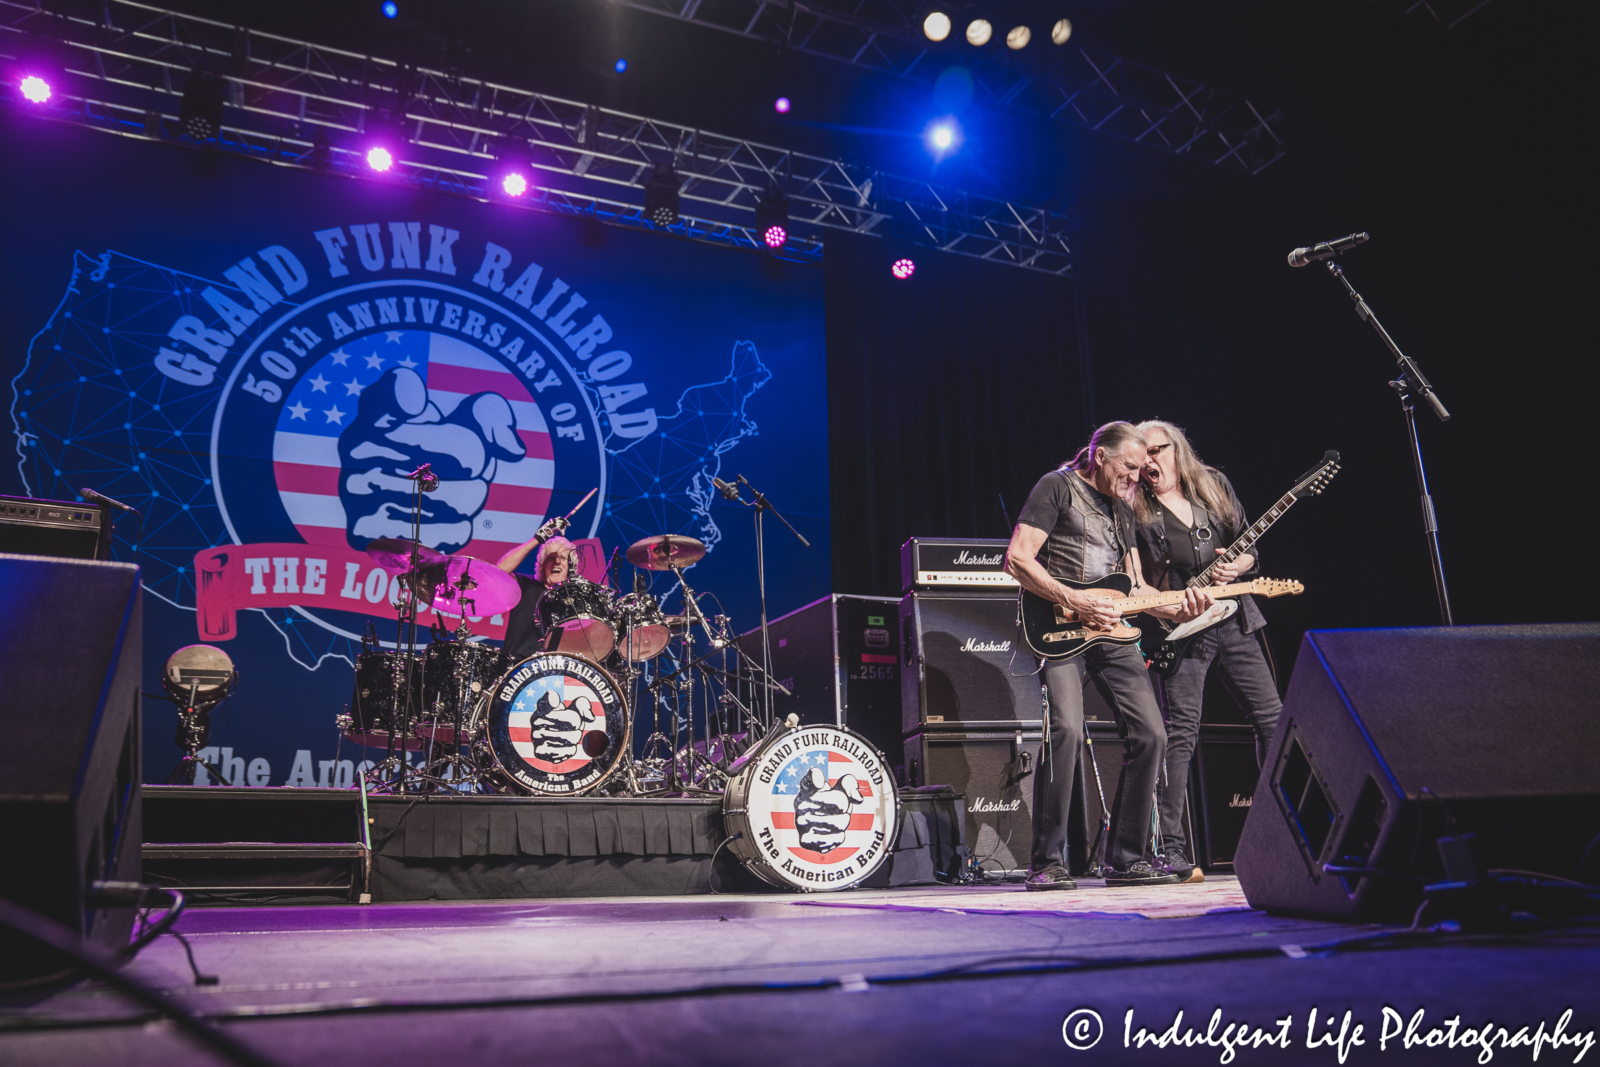 Grand Funk Railroad drummer Don Brewer, frontman Max Carl and guitarist Mark Chatfield performing together at Ameristar Casino in Kansas City, MO on June 21, 2024.